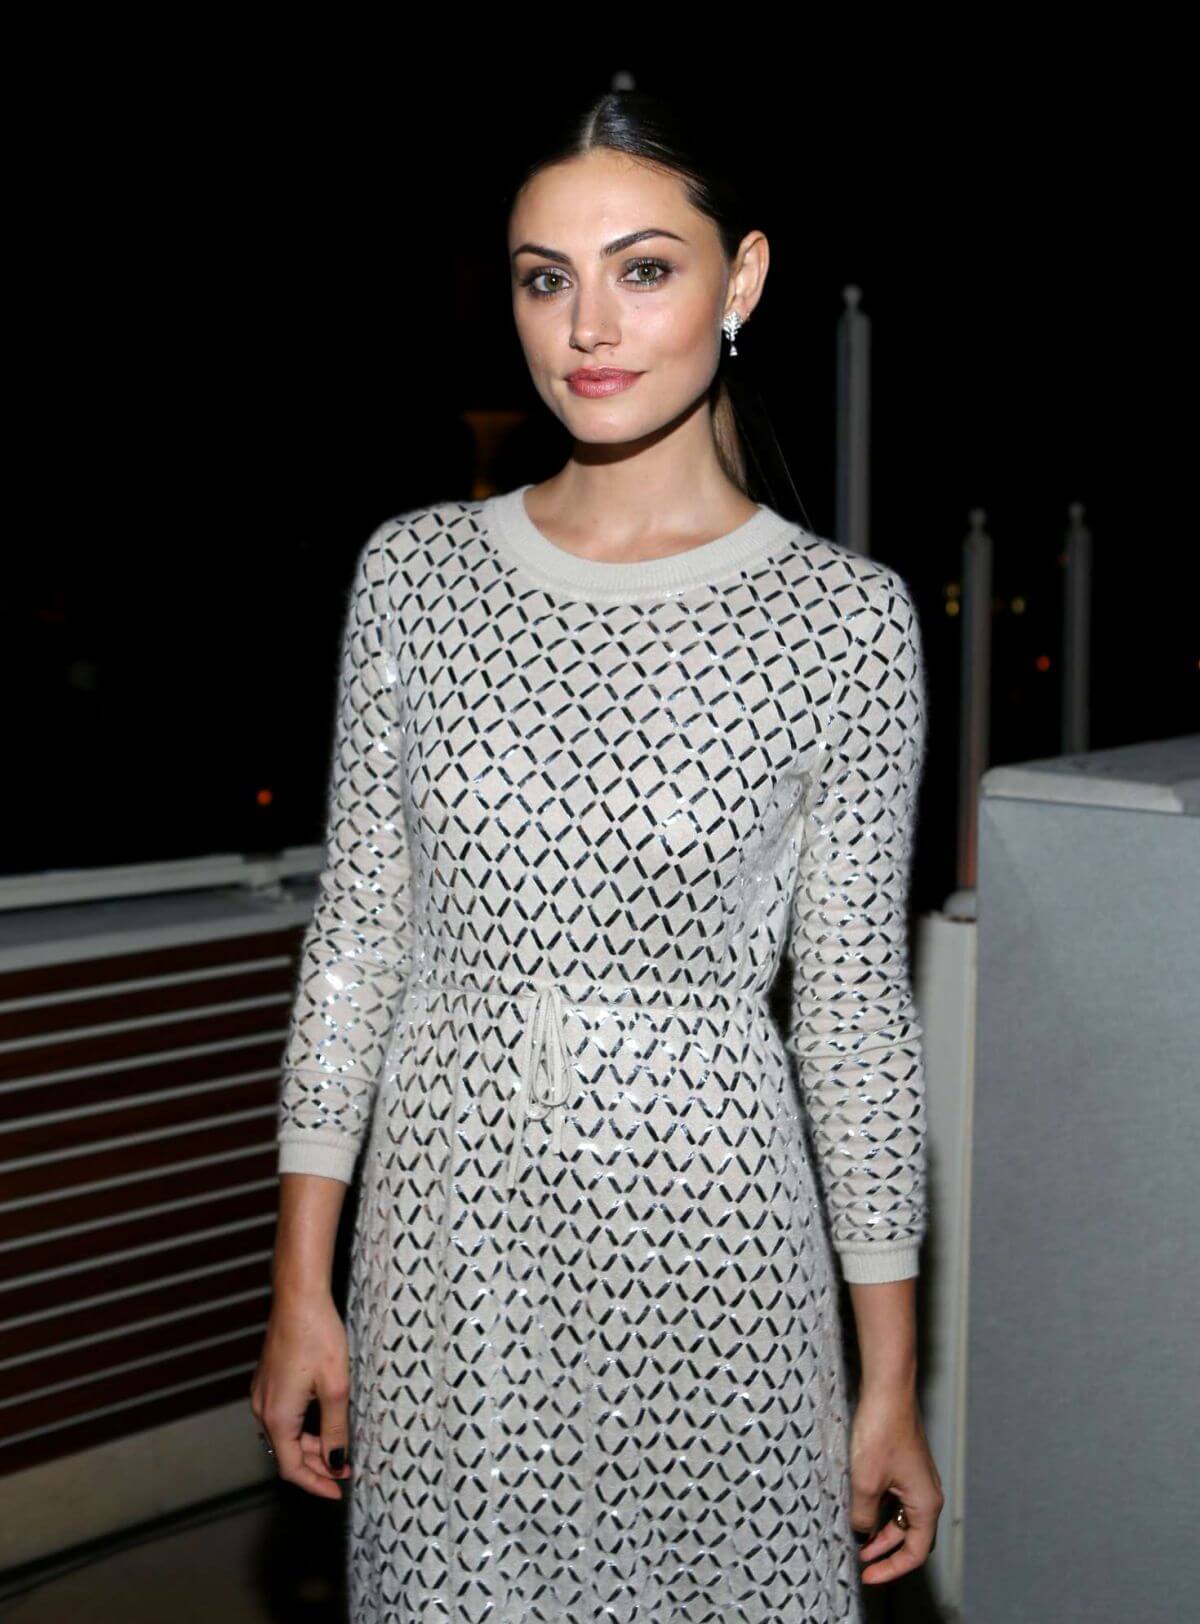 Phoebe Tonkin at Chanel Celebrates Launch in Los Angeles